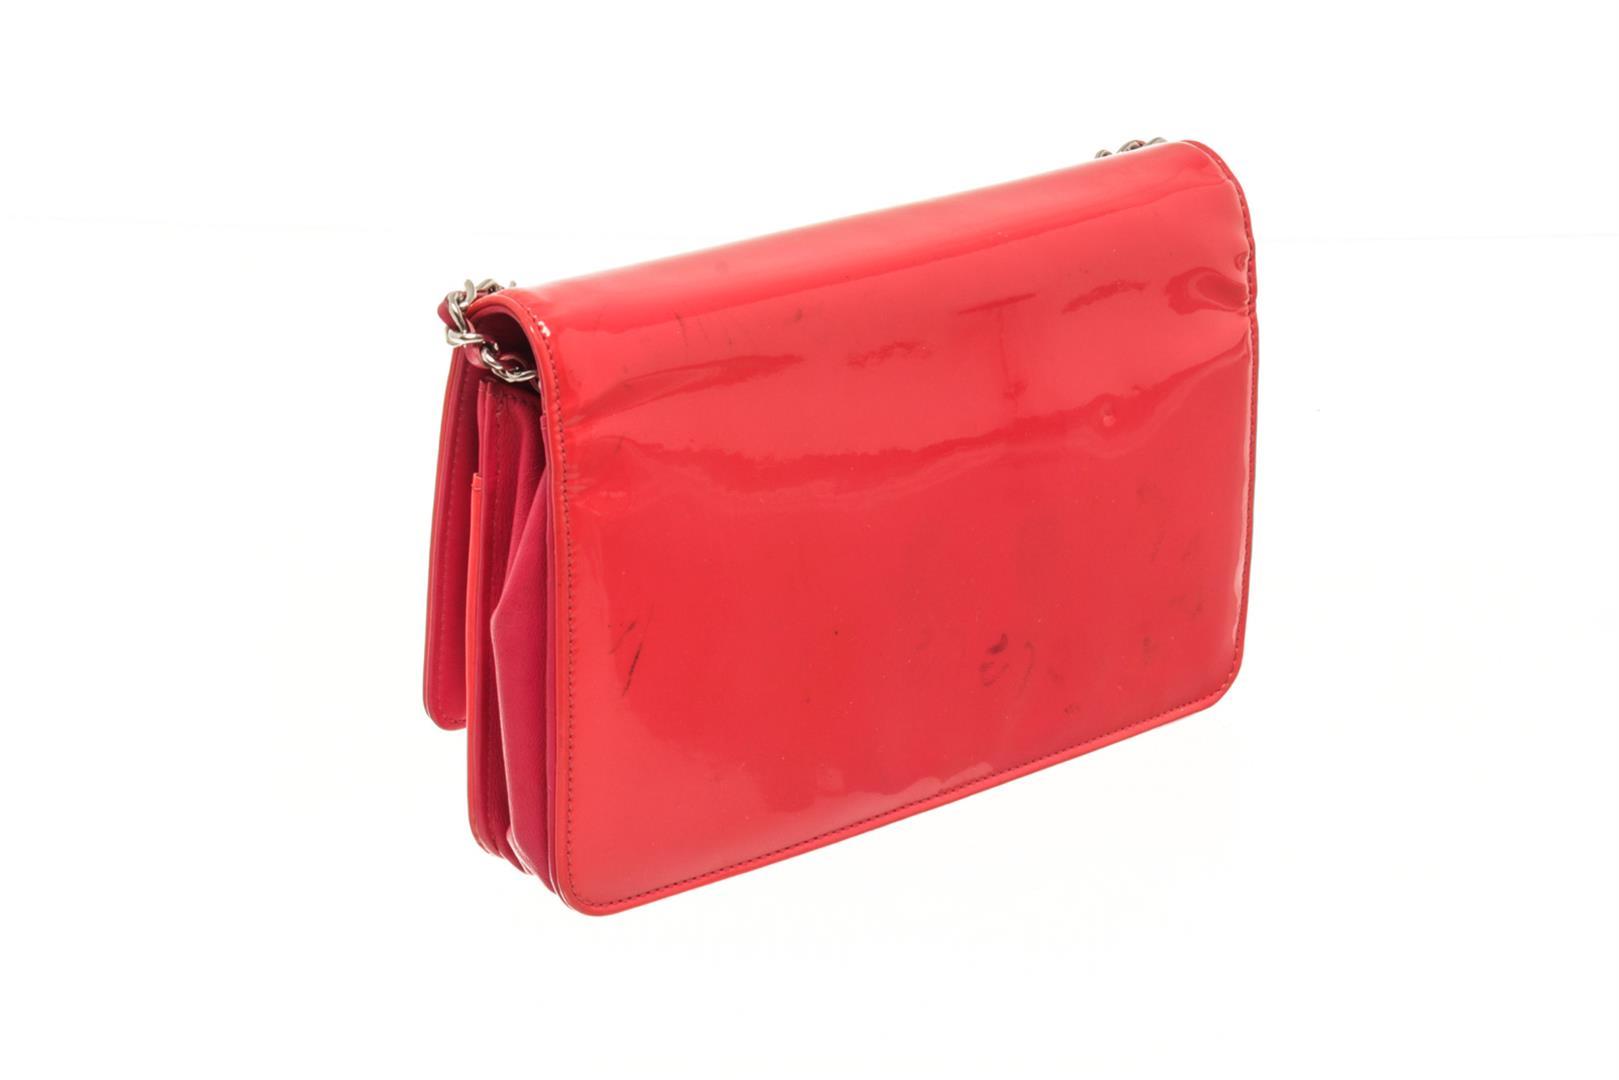 Chanel Red Patent Leather Woc Shoulder Bag